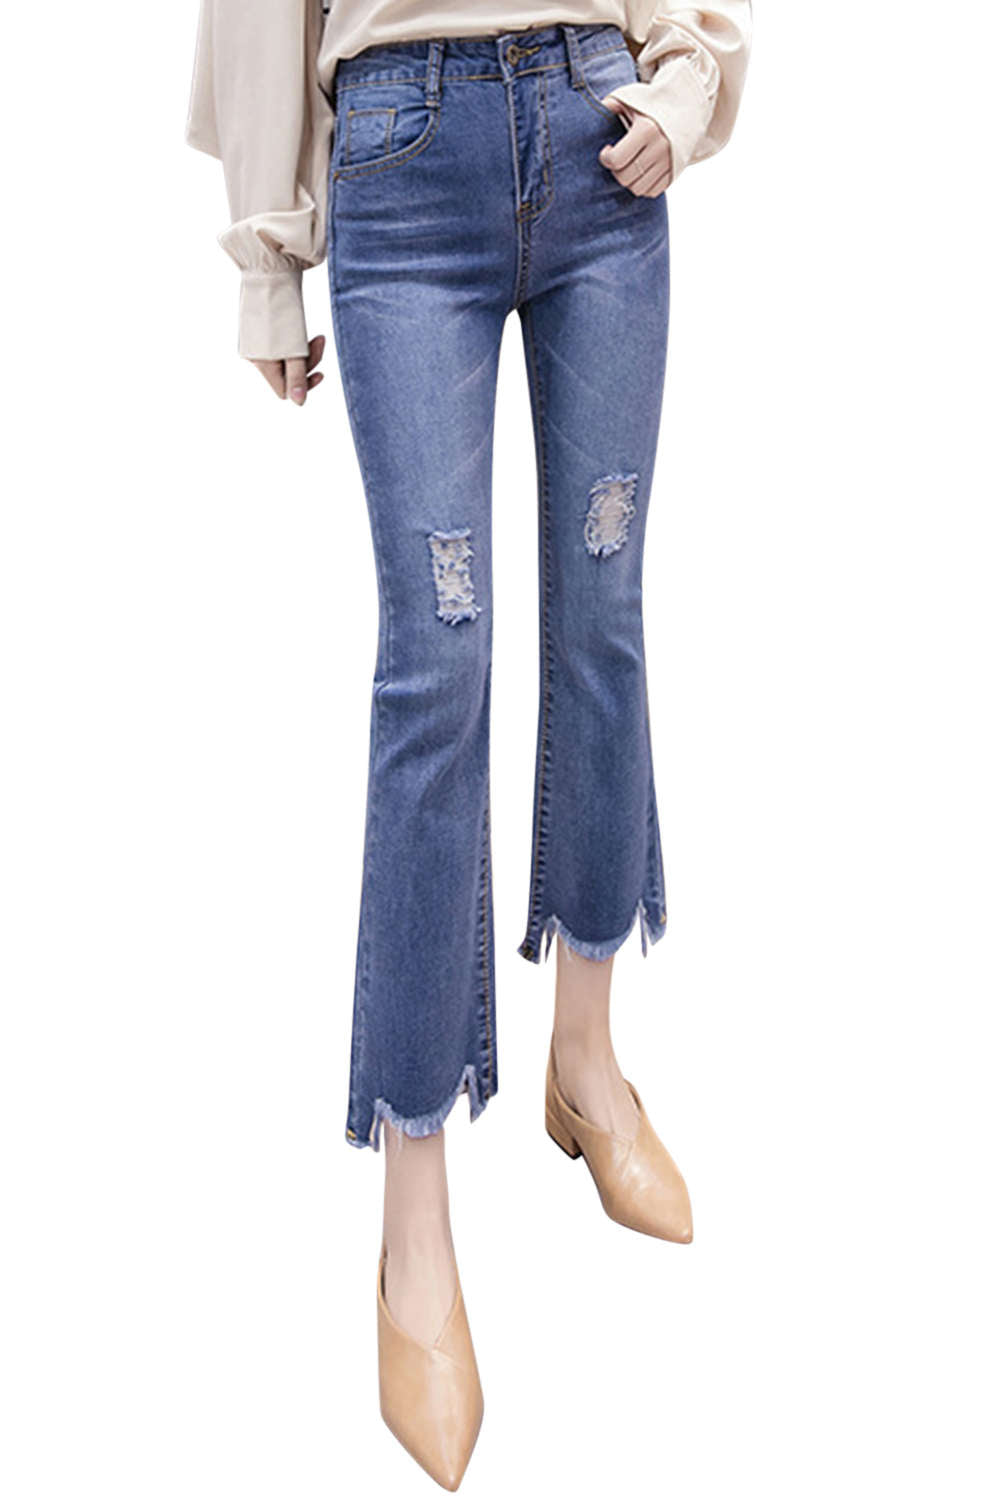 Iyasson Women's High Rise Staight Leg Jeans